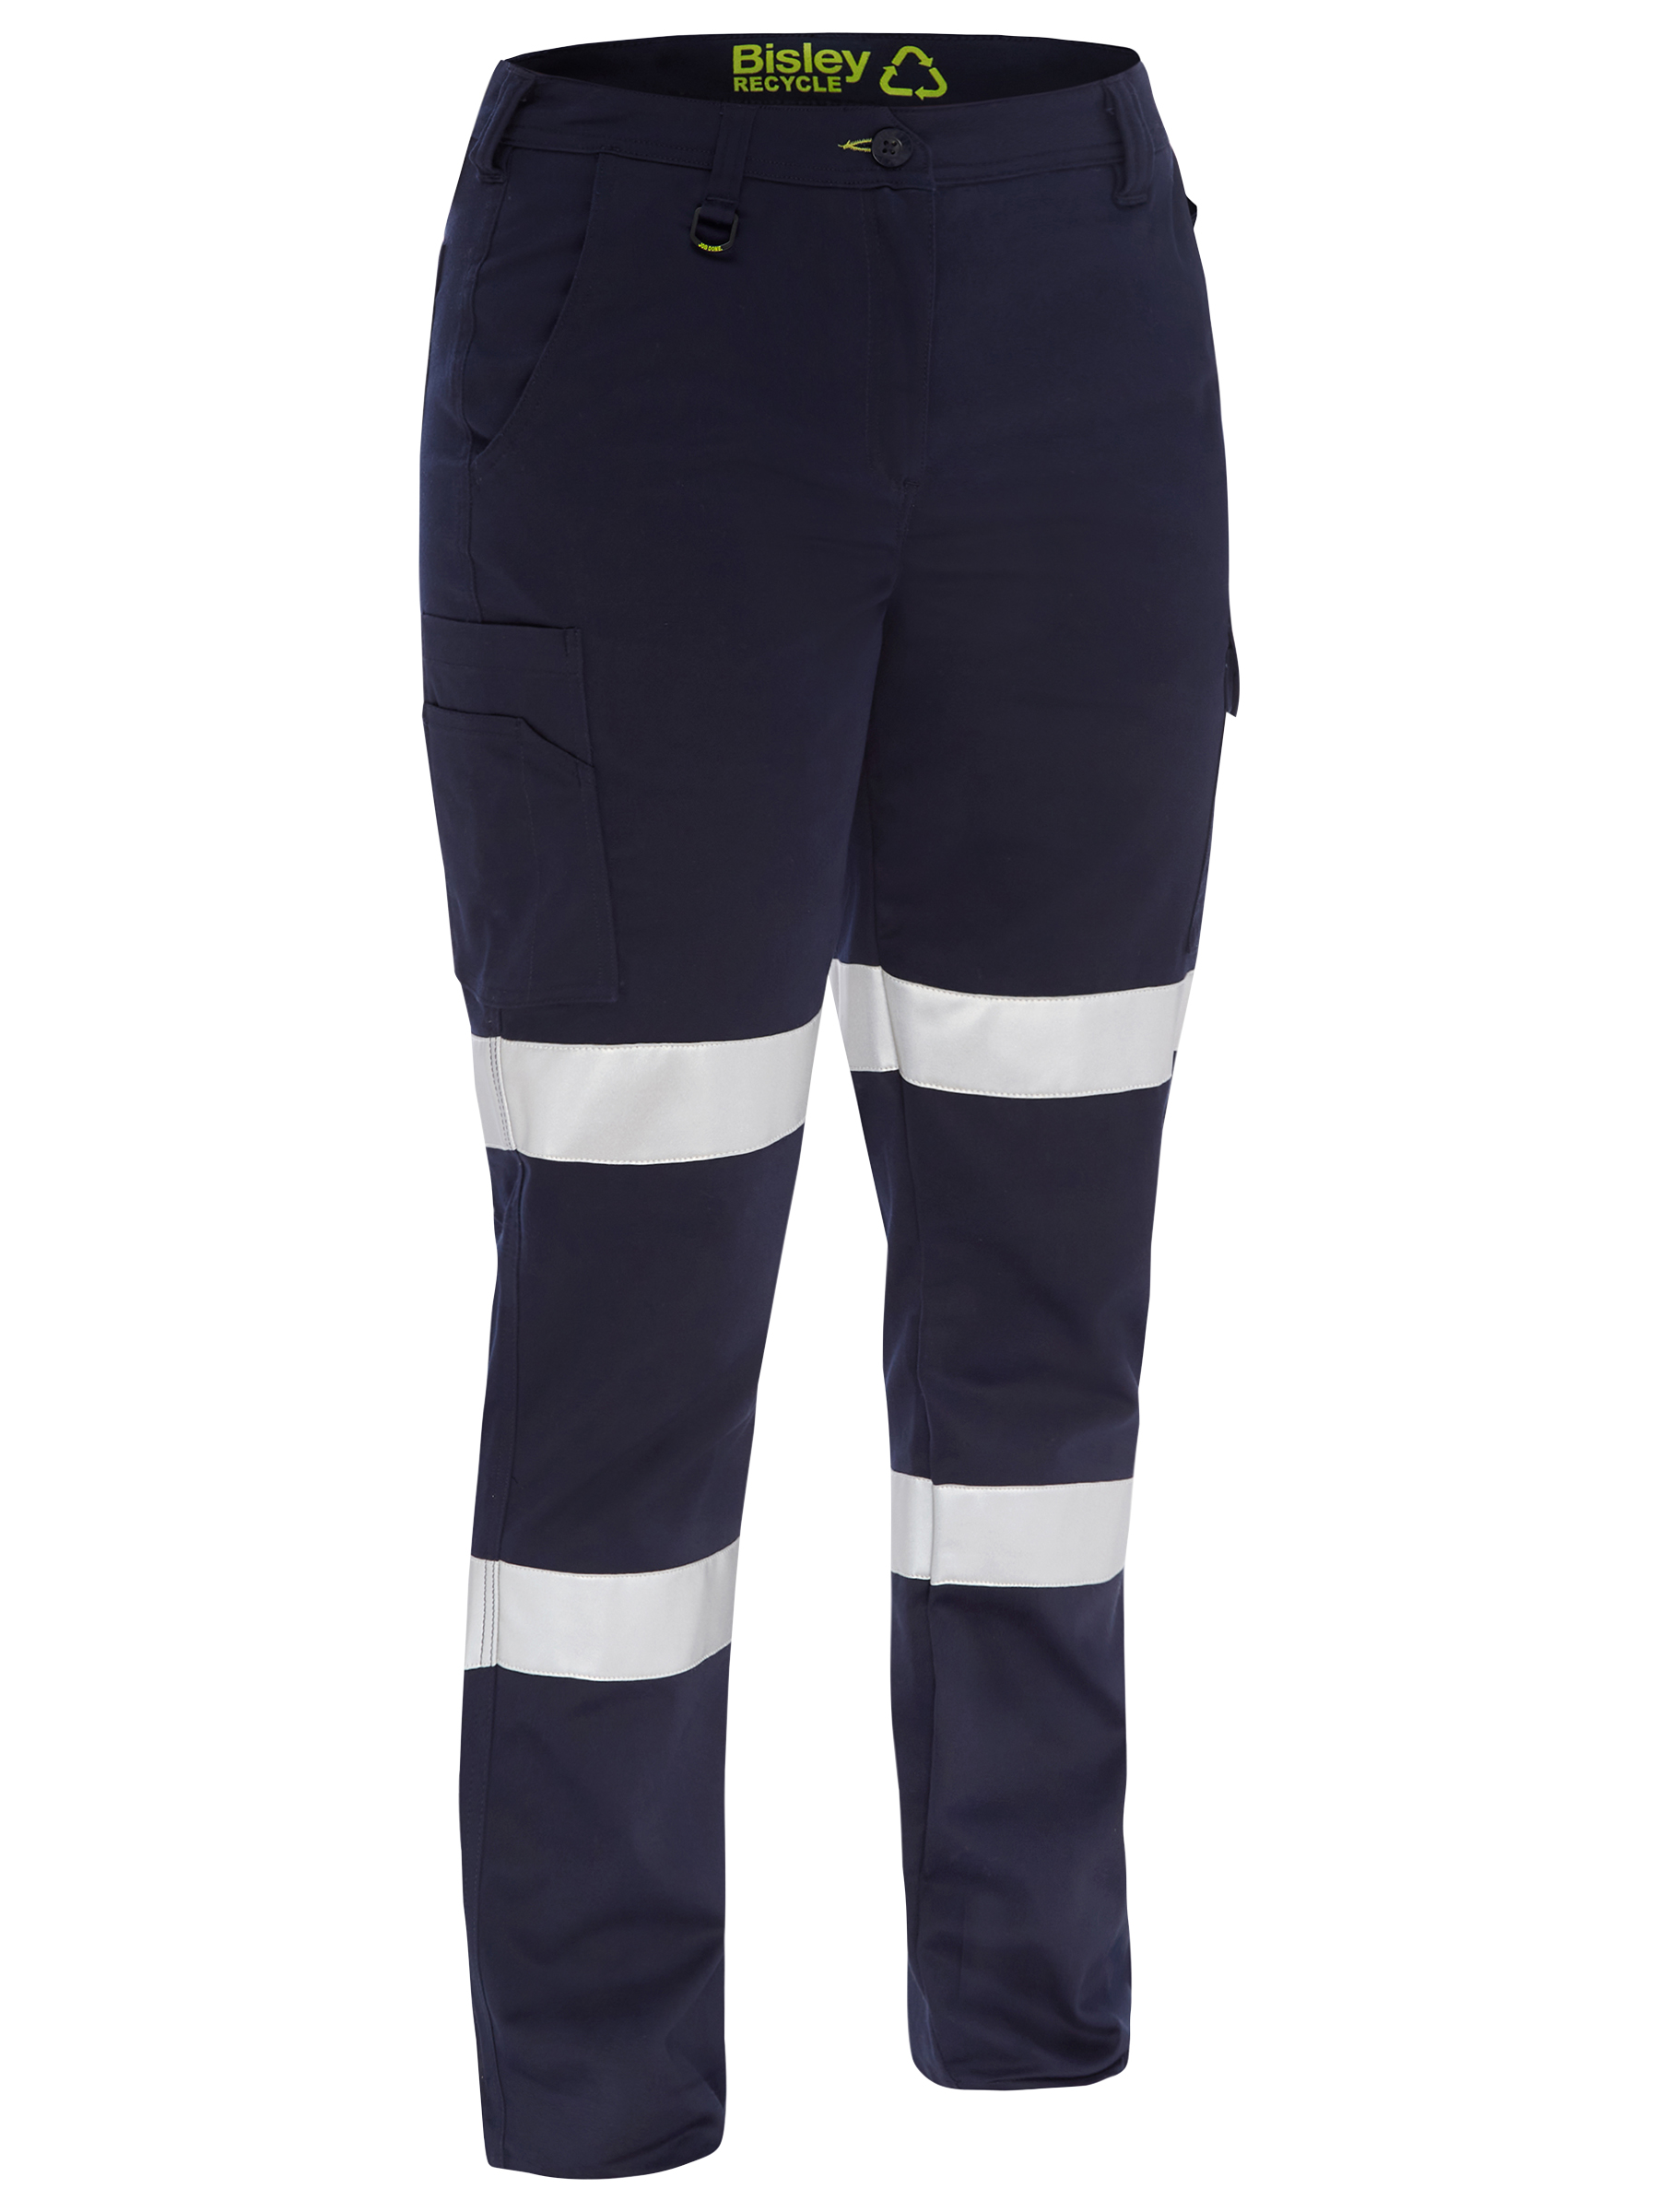 BISLEY RECYCLED: WOMEN'S TAPED BIOMOTION  CARGO WORK PANT BPCL6088T Logo